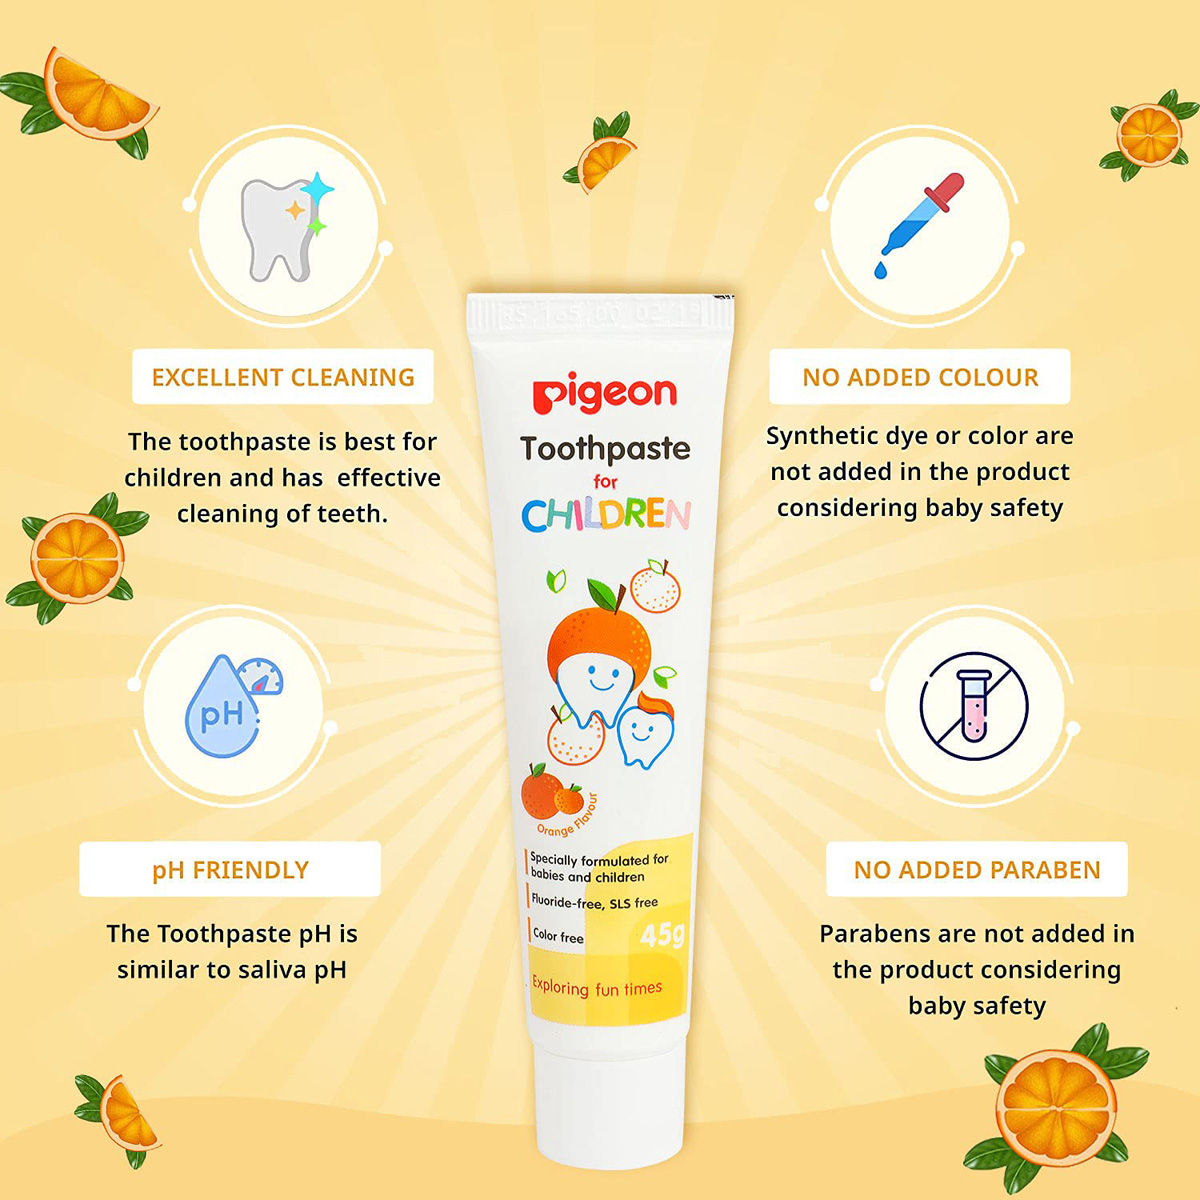 Pigeon Orange Flavour Toothpaste for Children, 45 gm, Pack of 1 